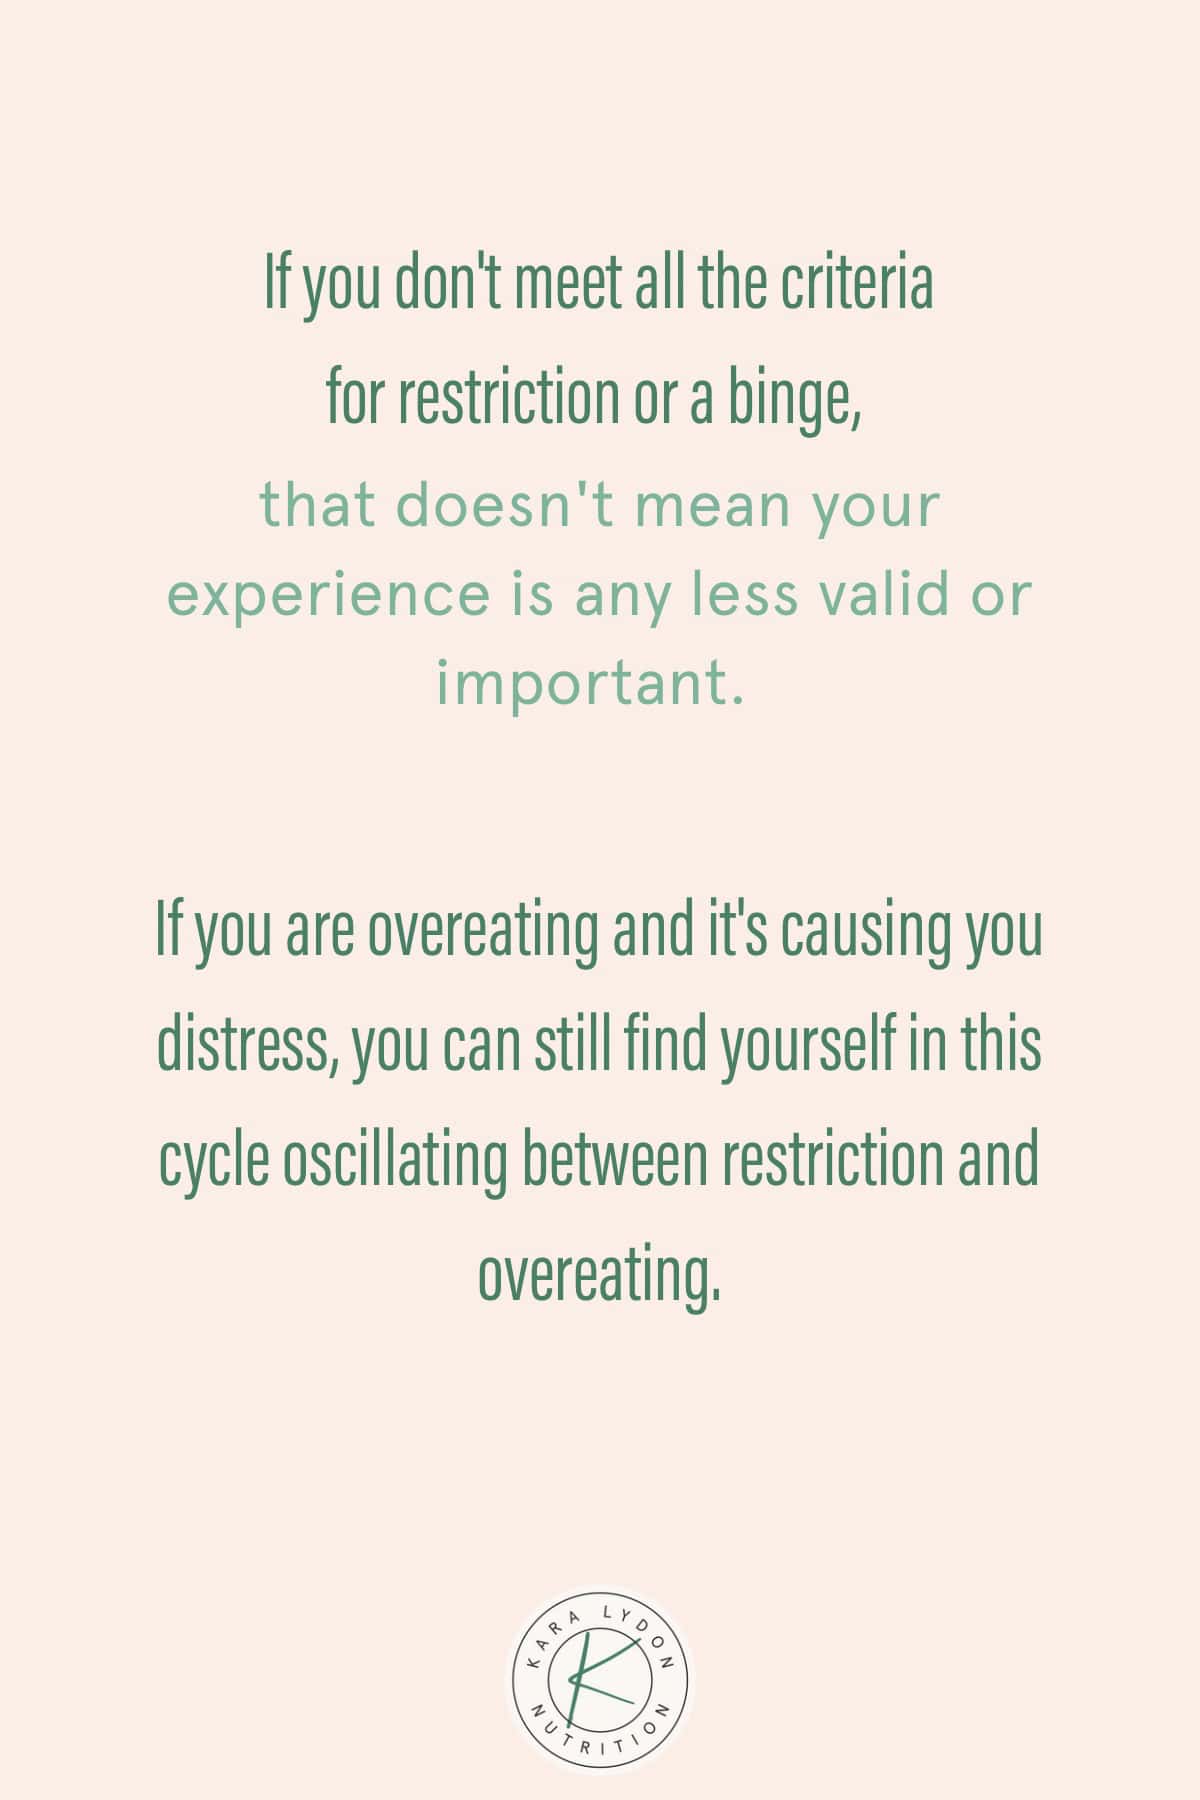 Graphic with quote: "If you don't meet all the criteria for restriction or a binge, that doesn't mean your experience is any less valid or important. If you are overeating and it's causing you distress, you can still find yourself in this cycle oscillating between restriction and overeating."